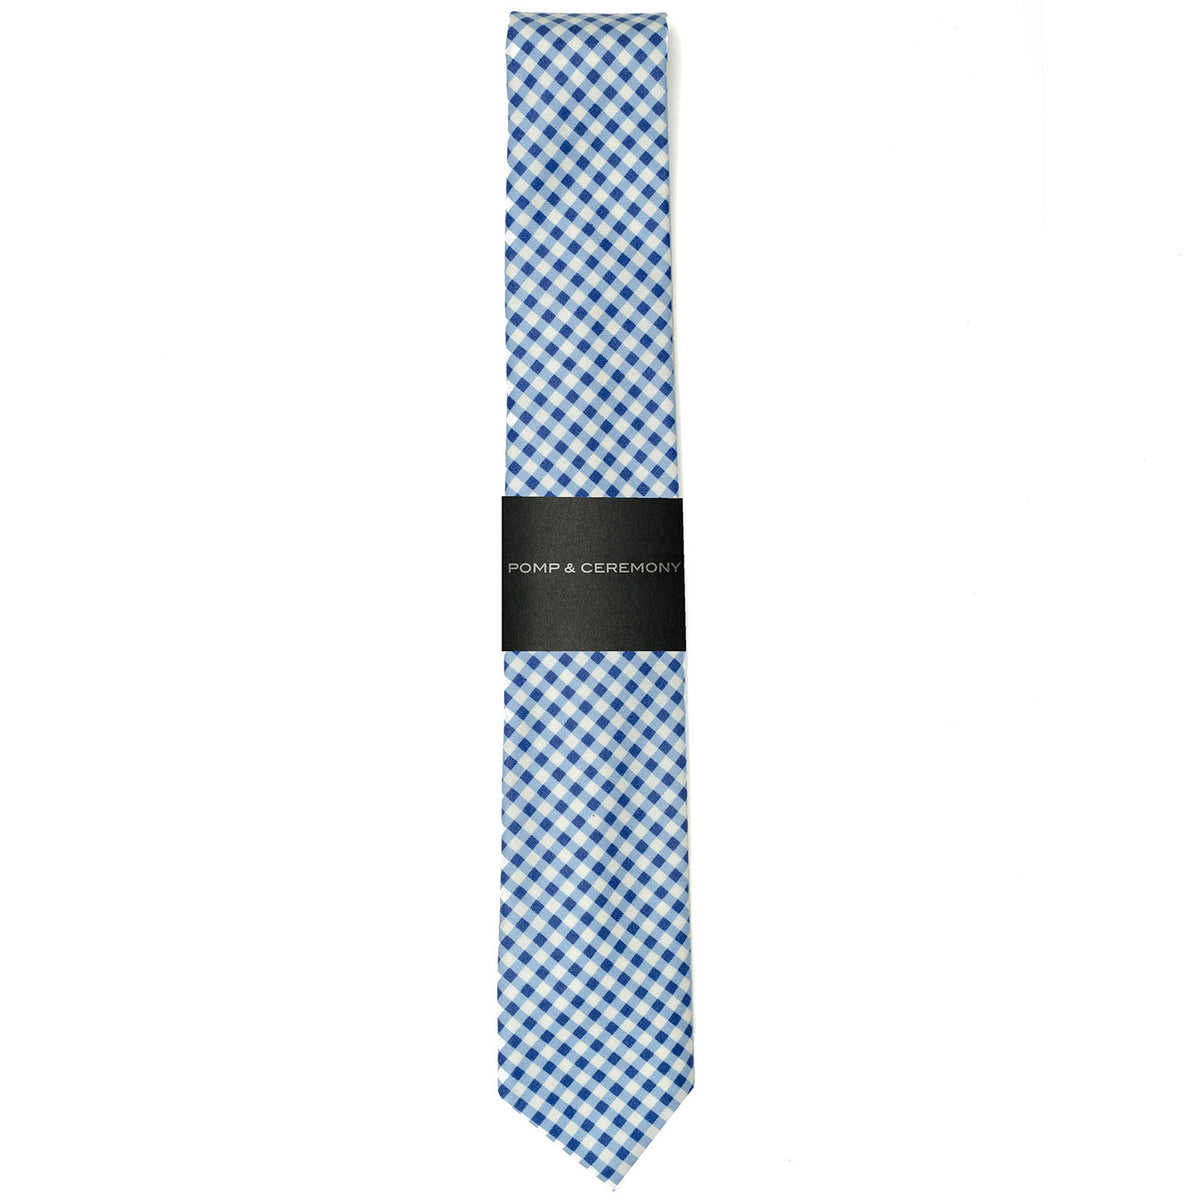 Liberty of London Blue Gingham Tie